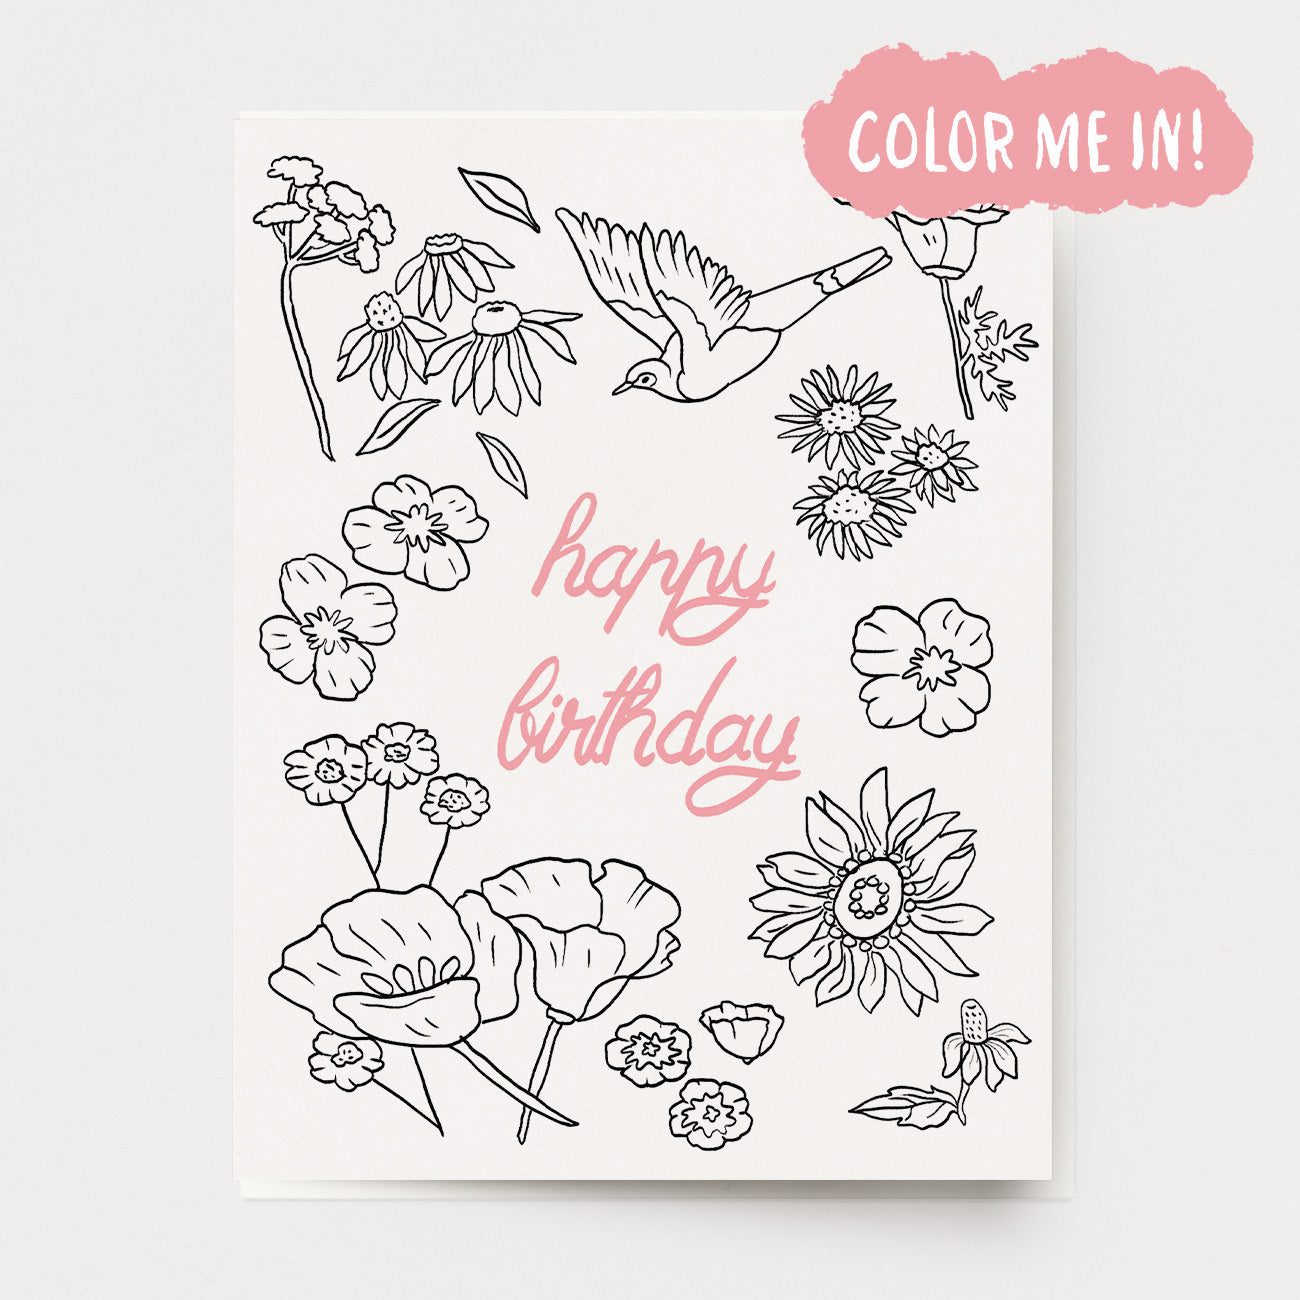 A coloring birthday card of flowers and a bird, with the text "happy birthday" in the center in pink.  Hand illustrated by artist Katherine Lewis. Made by Ingrid Press card and gift company, ethically printed in the USA.